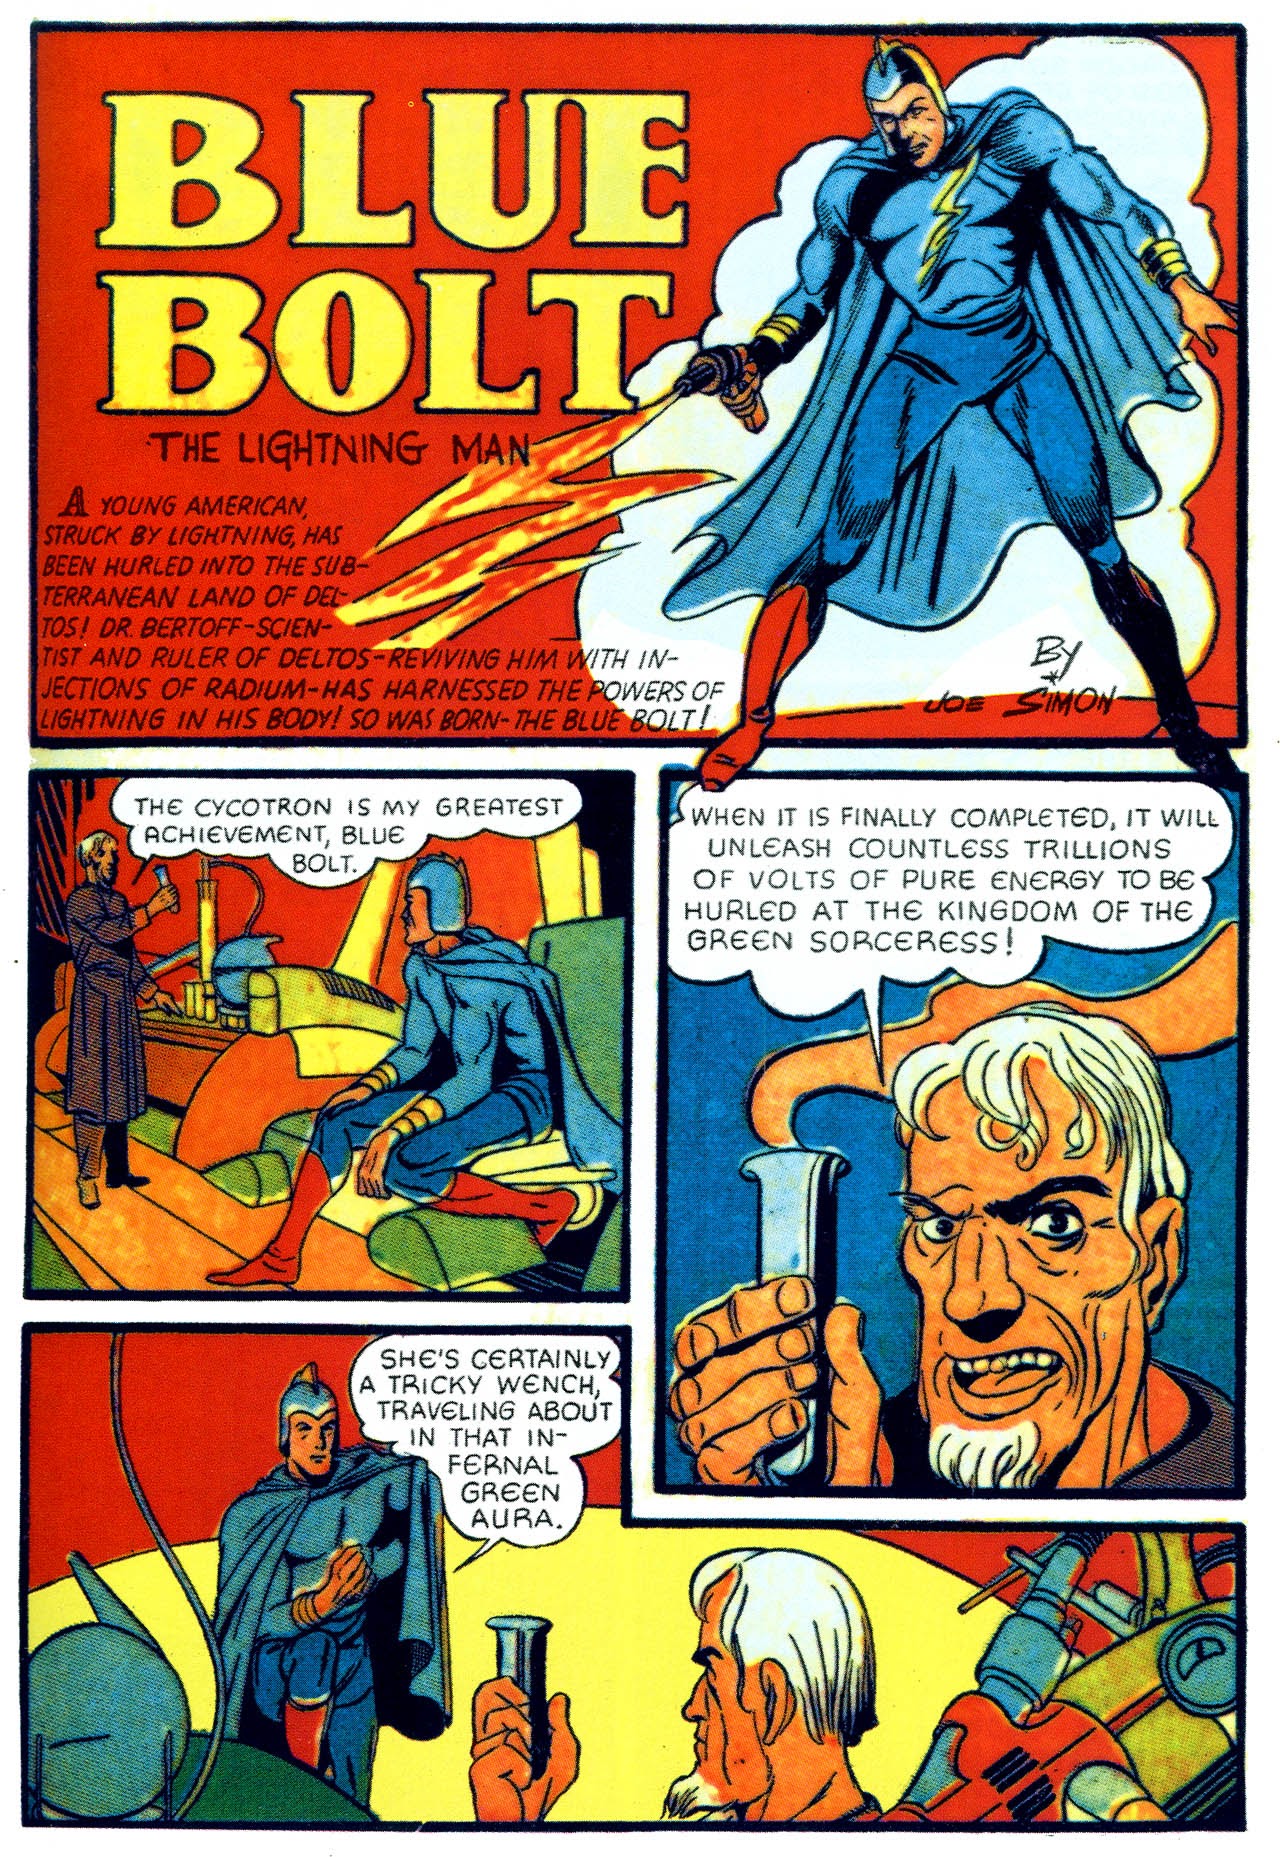 Read online Blue Bolt comic -  Issue # TPB - 2